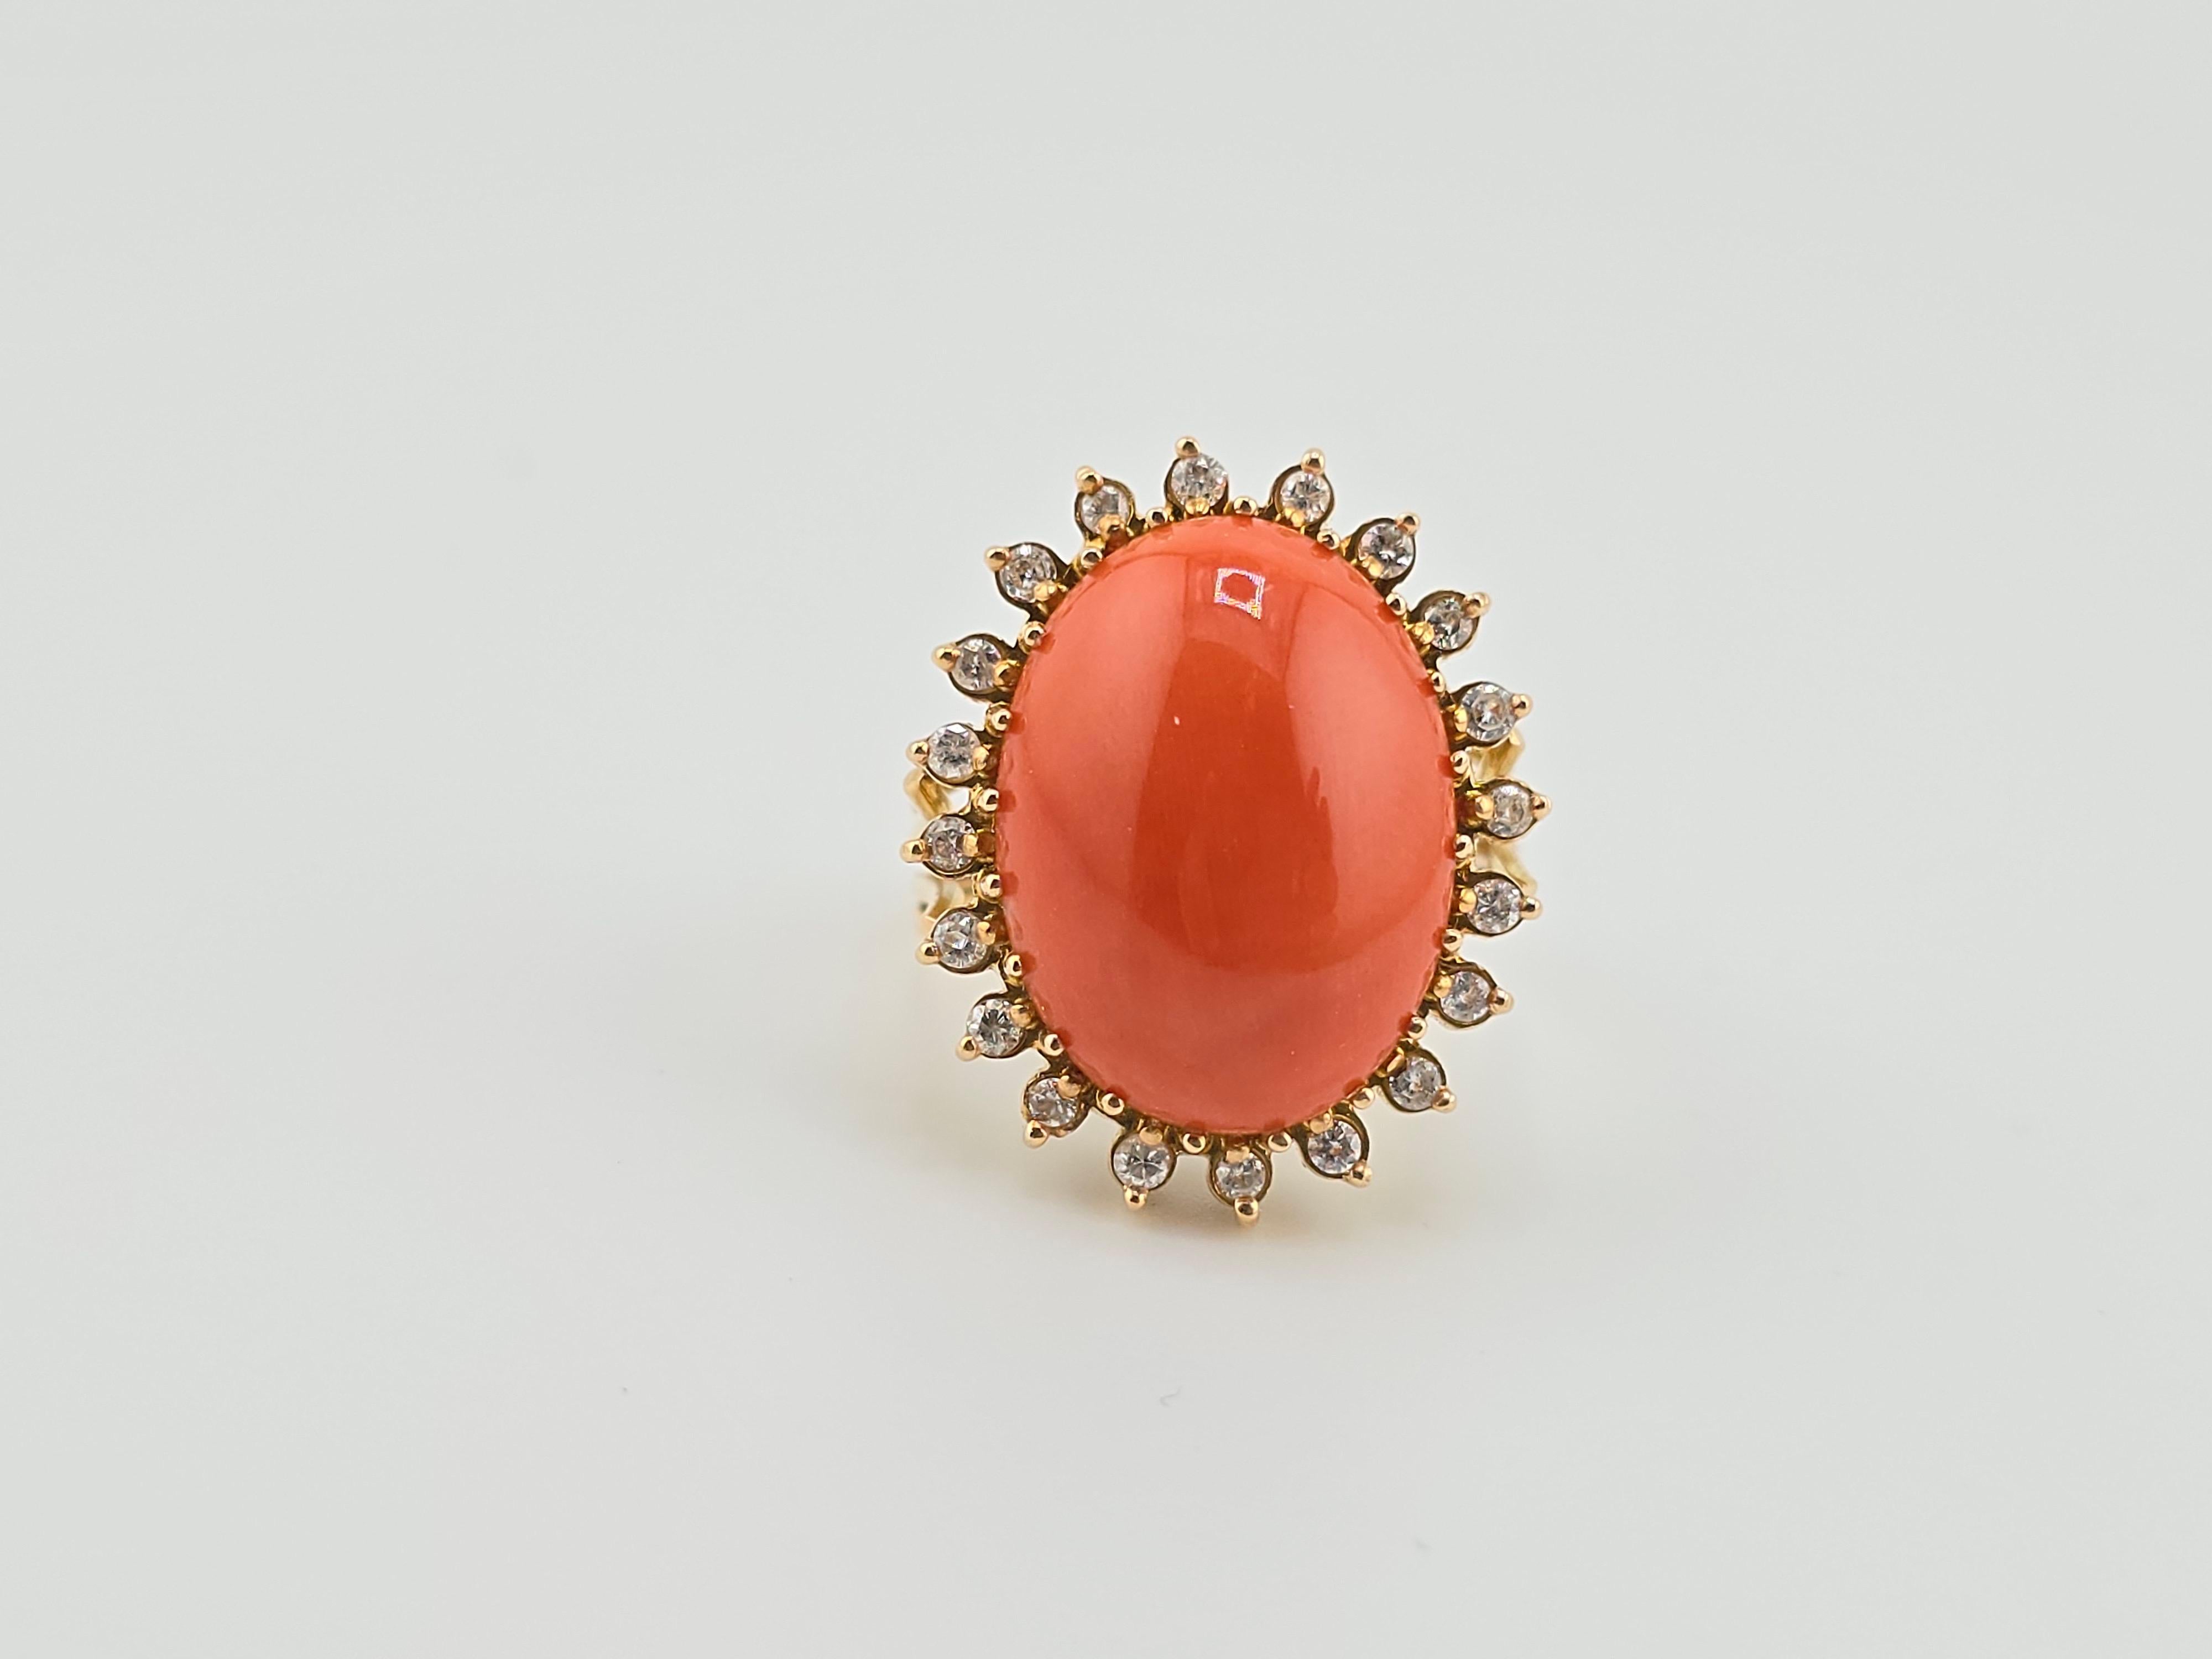 Marvelous Italian Momo Coral 14K Yellow Gold Ring Surrounded With Diamonds  In Good Condition For Sale In Media, PA